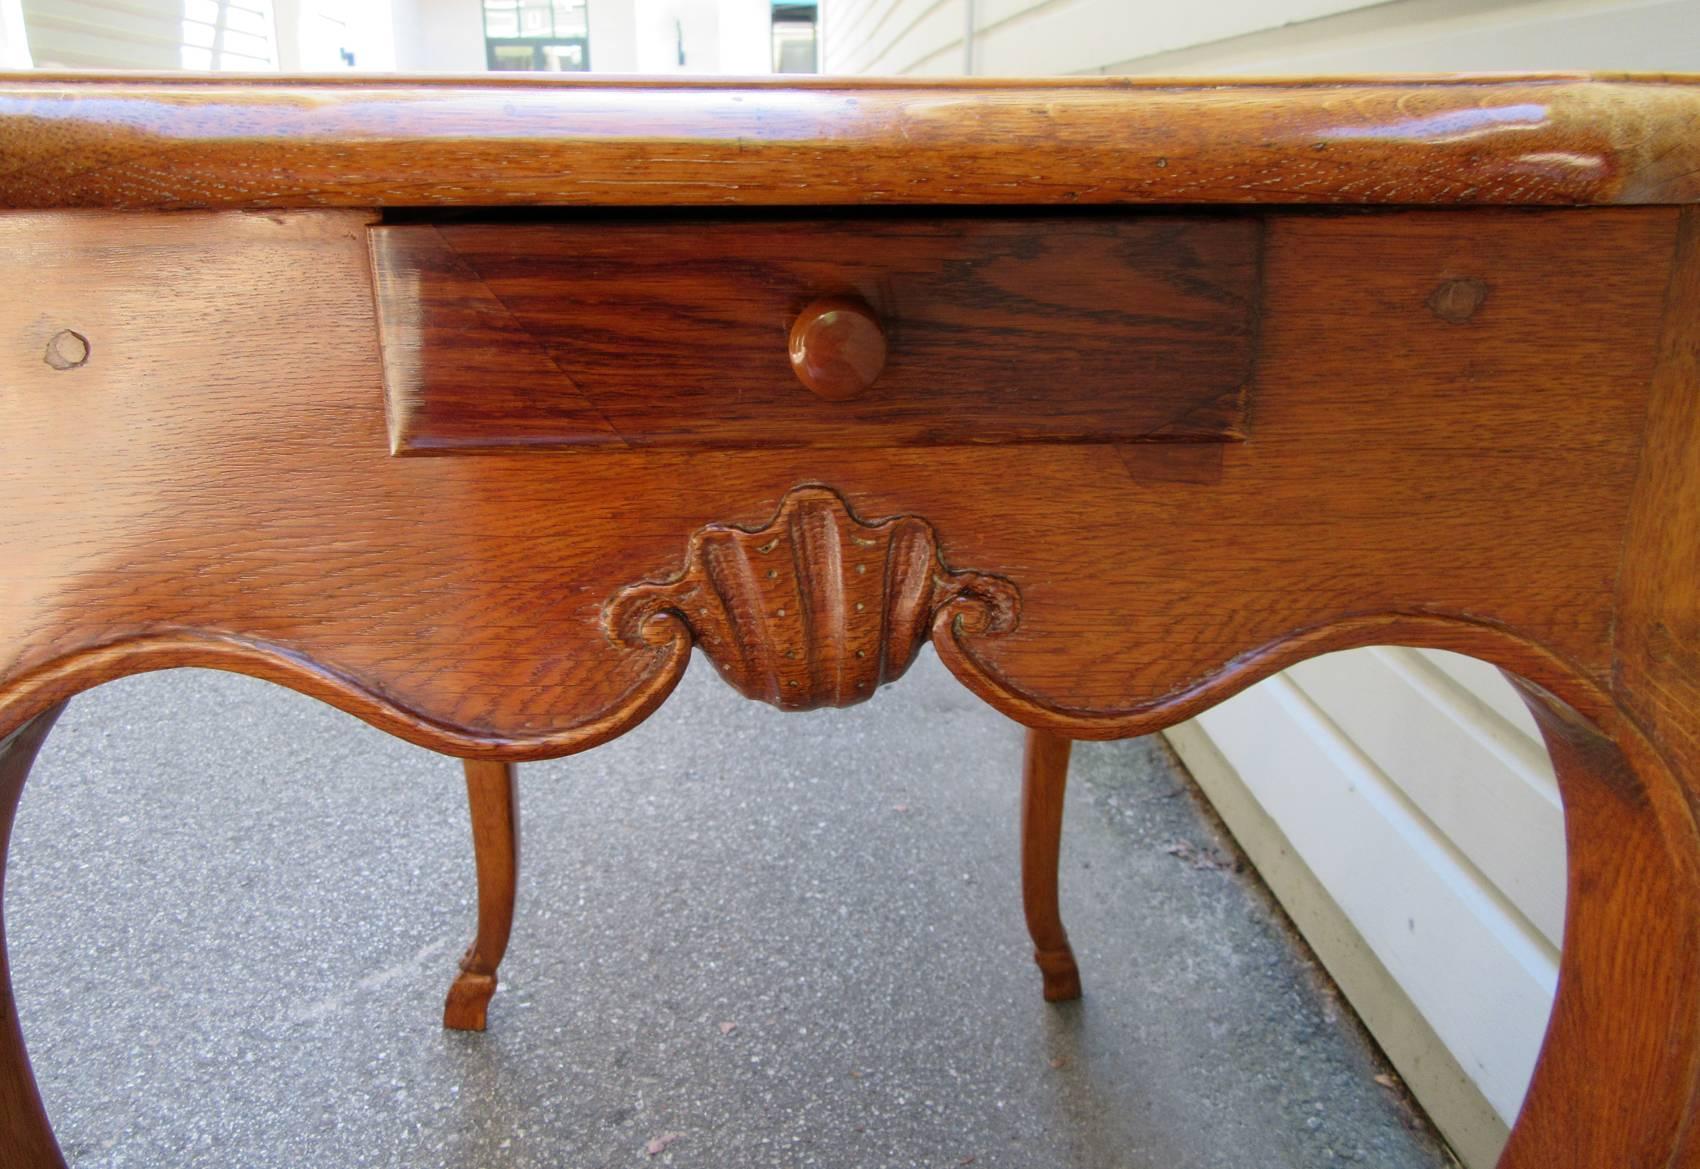 Late 18th Century, French Provincial Marquetry Table with Perfumery Label 2